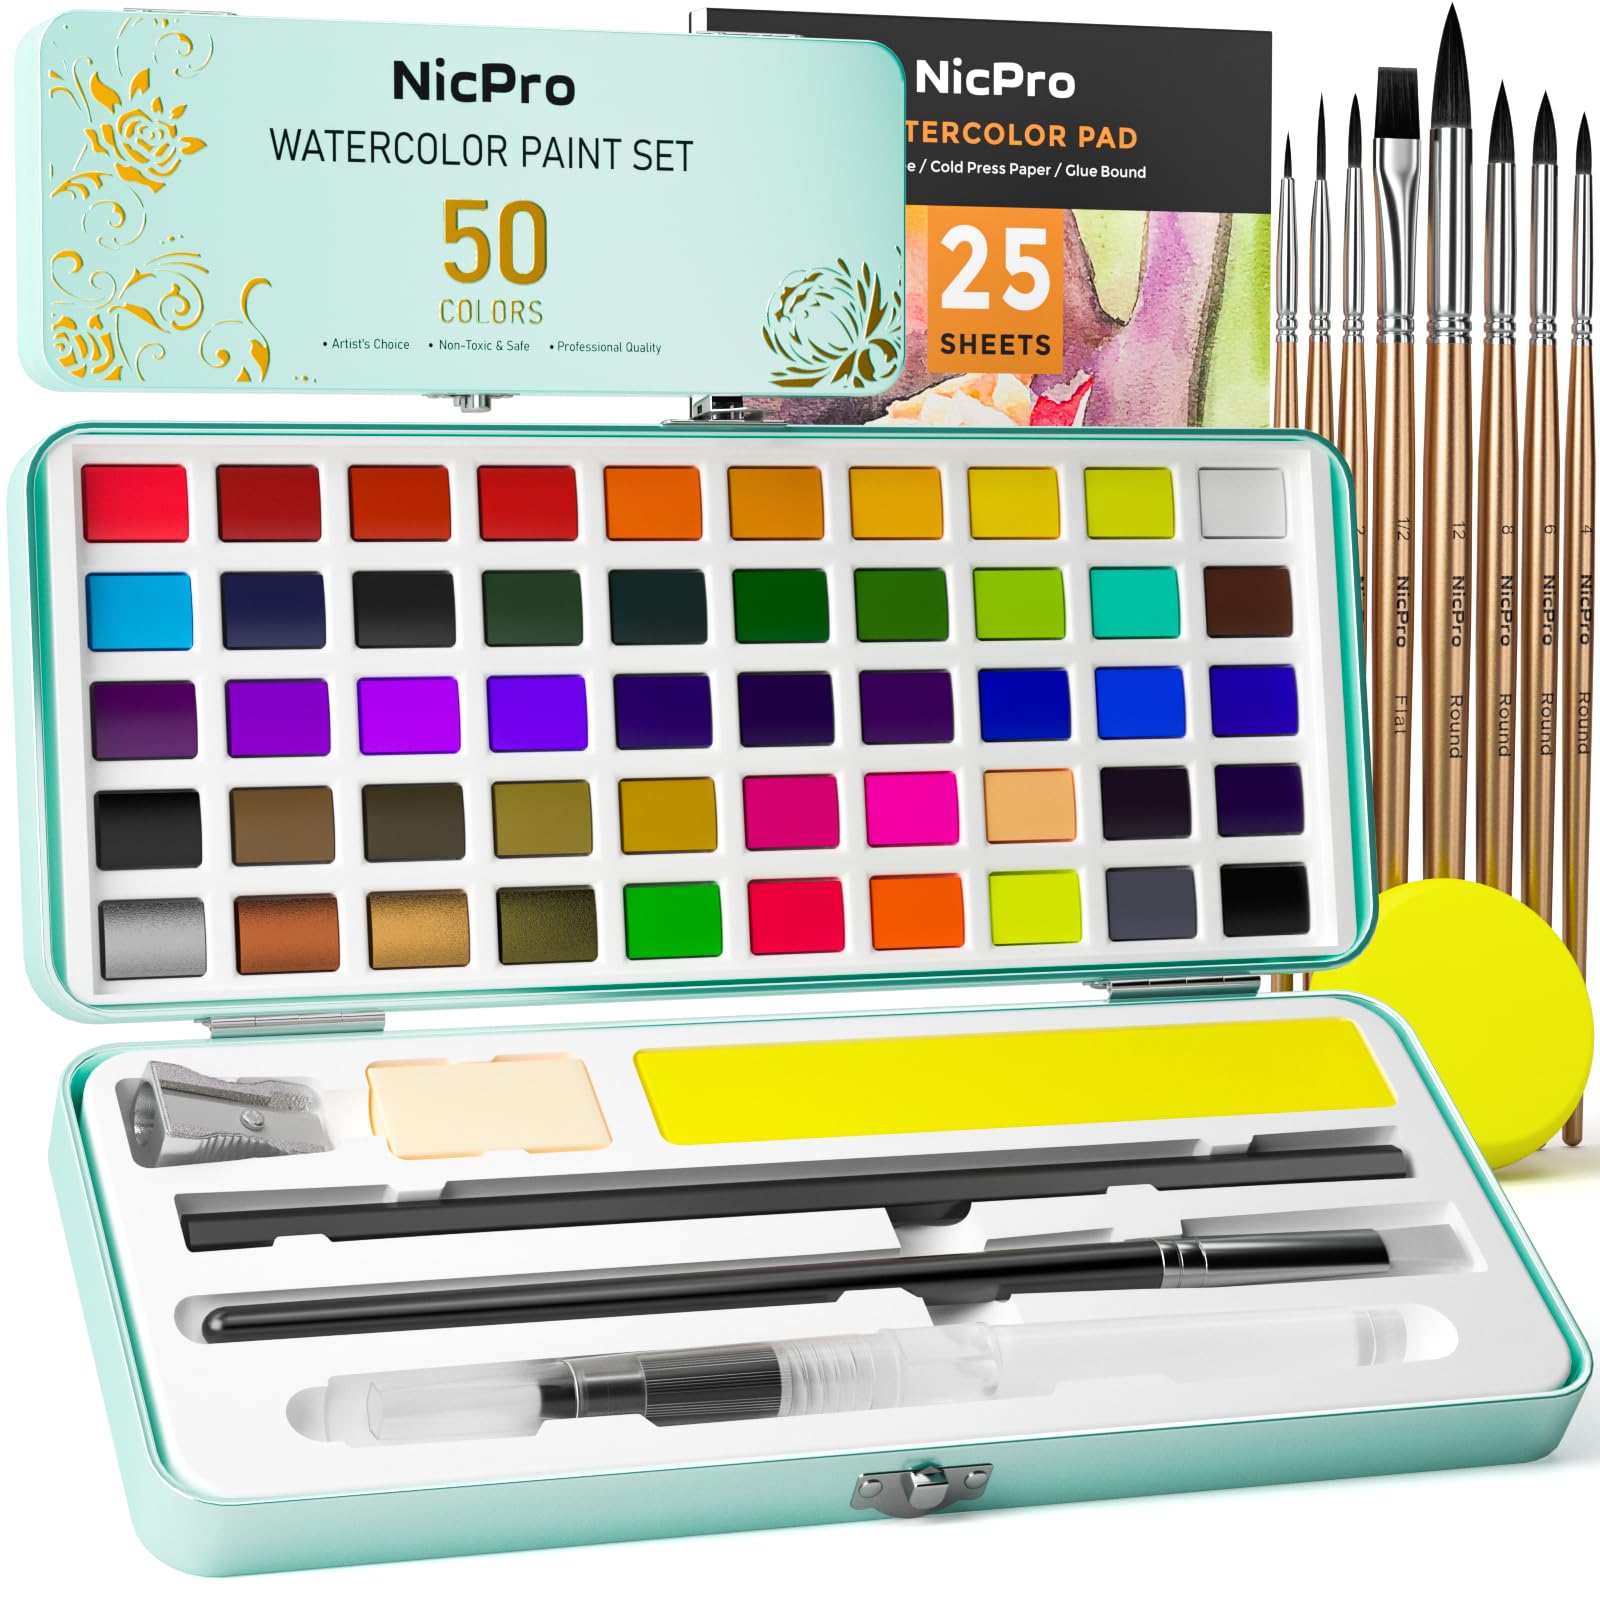 Nicpro 50 Colors Watercolor Paint Set, with Metallic & Fluorescent Color, 8 Squirrel Painting Brushes, 25 Water Color Paper & Palette, Art Supplies Kit for Artist, Adult, Kid, Beginner